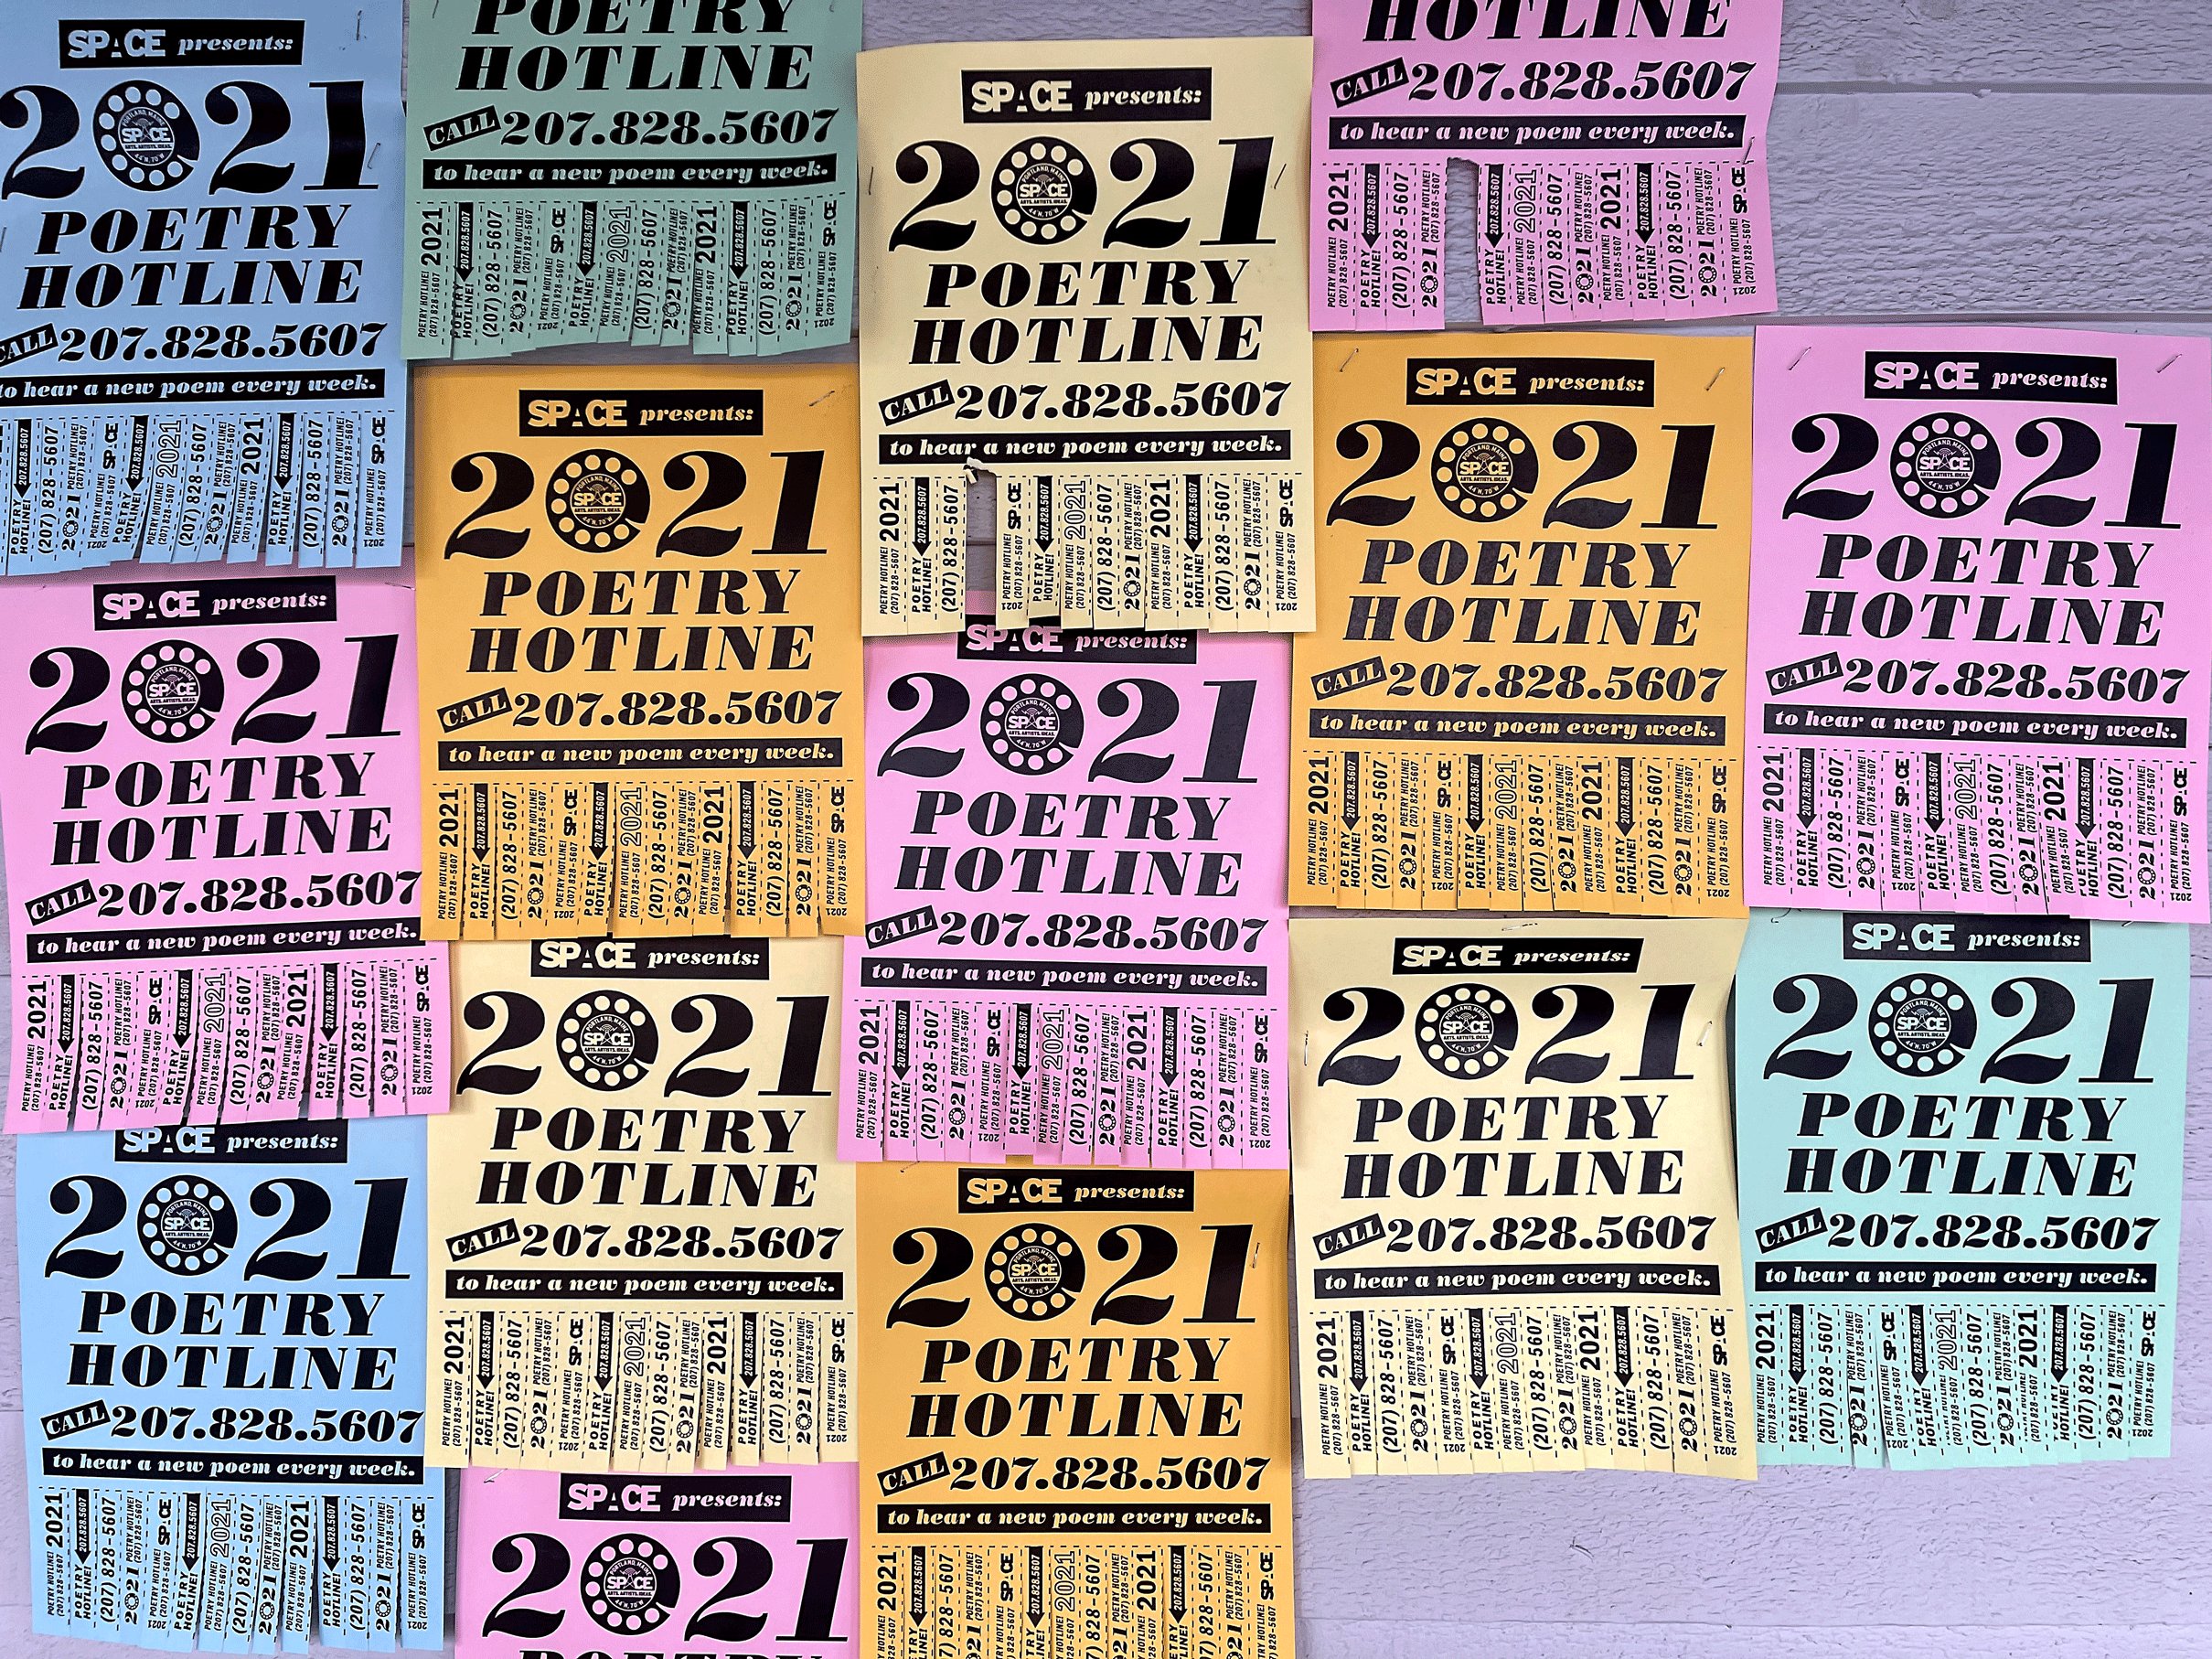 Flyers in multiple colors for the SPACE poetry hotline 207-828-5607